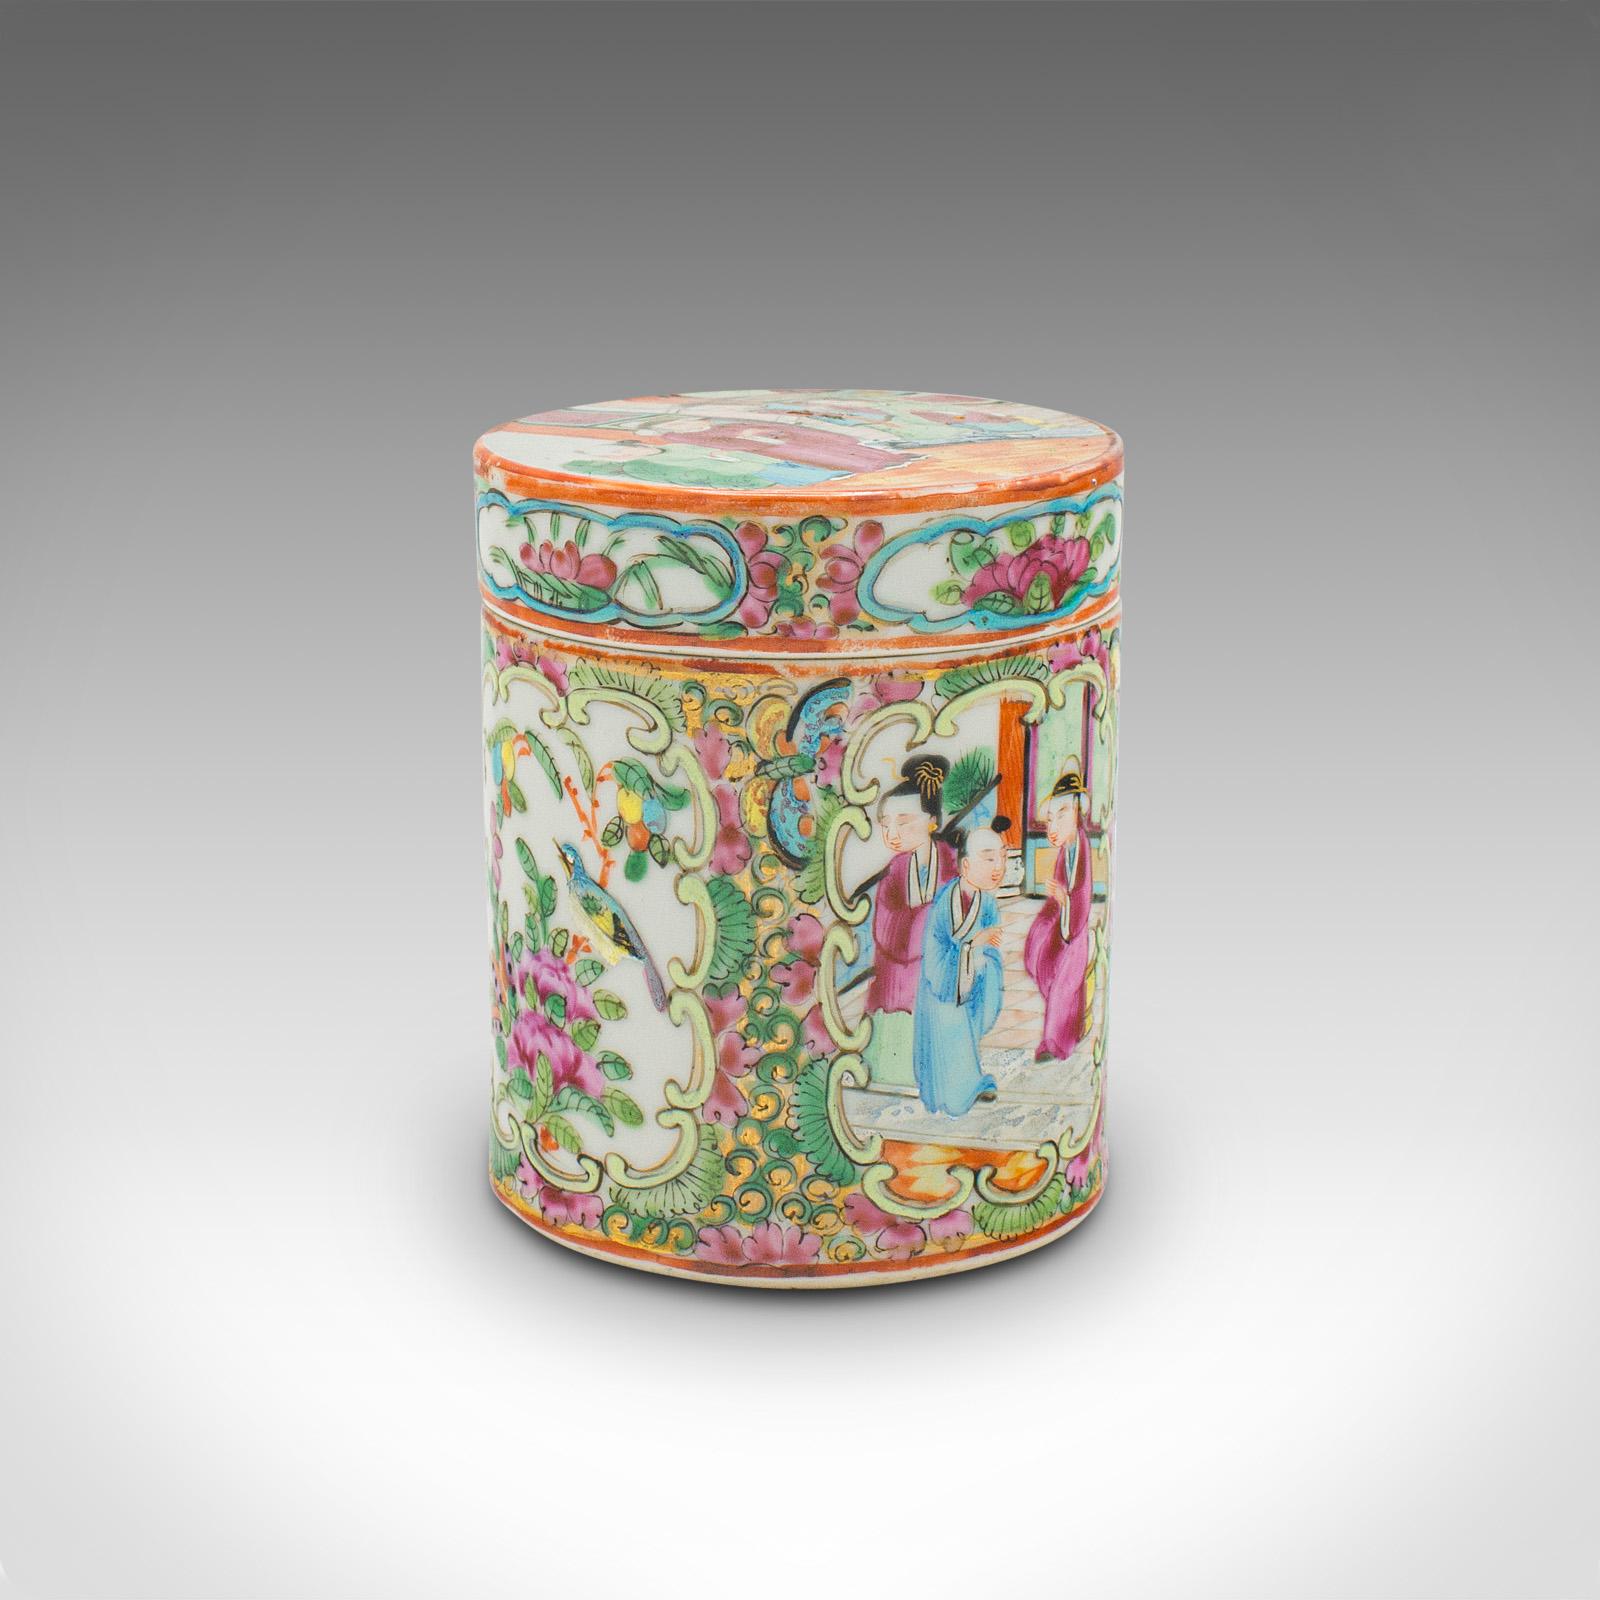 This is a small antique Famille Rose spice jar. A Chinese, hand-painted ceramic decorative pot, dating to the late Victorian period, circa 1900.

Diminutive, but ornately decorative traditional jar
Displays a desirable aged patina and in good